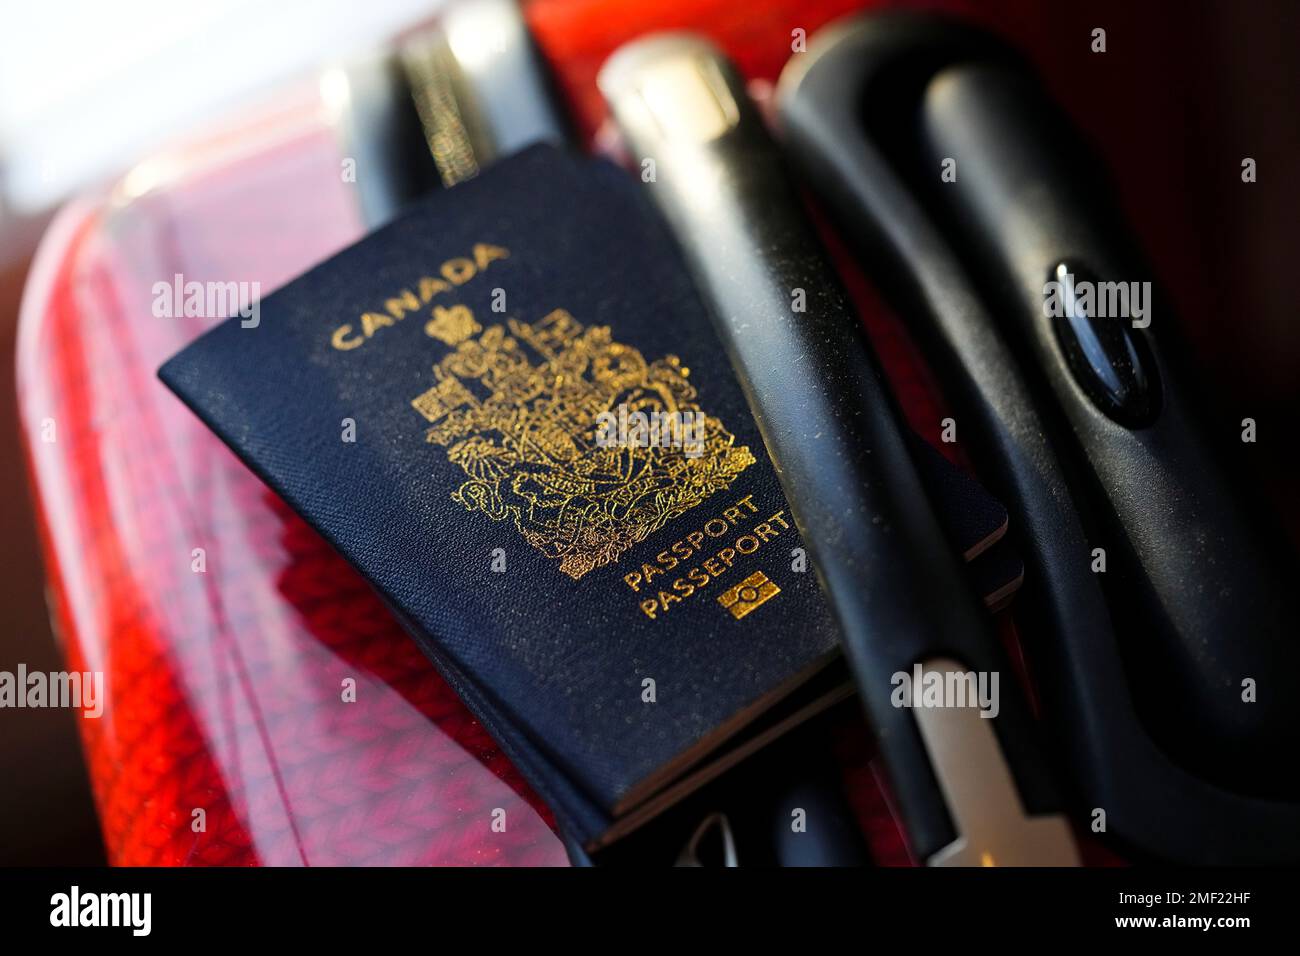 A Canadian Passport Sits On A Suitcase In Ottawa On Tuesday Jan 17 2023 Social Development Minister Karina Gould Says Service Canada Has Virtually Eliminated The Backlog Of Thousands Of Passport Applications The Canadian Presssean Kilpatrick 2MF22HF 